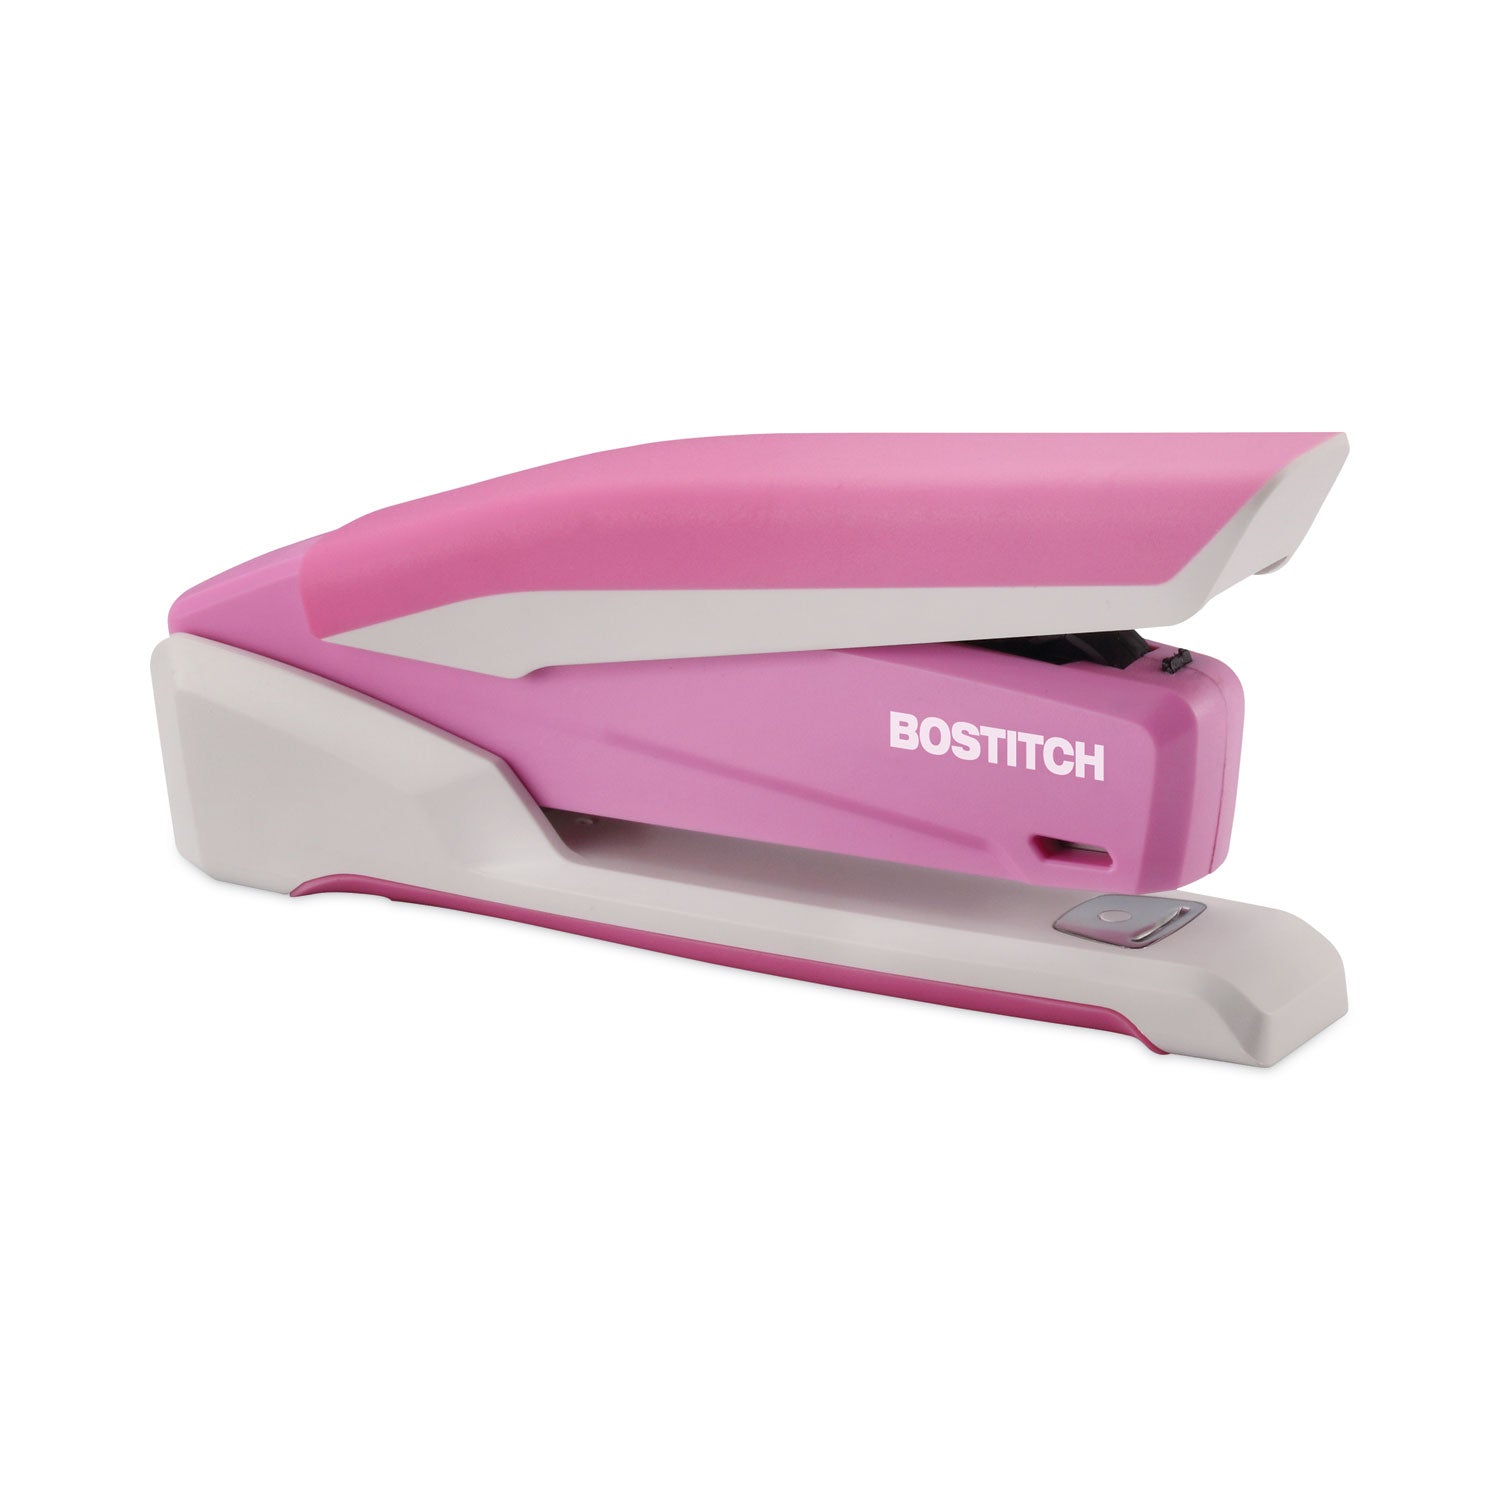 InCourage Spring-Powered Desktop Stapler with Antimicrobial Protection, 20-Sheet Capacity, Pink/Gray - 